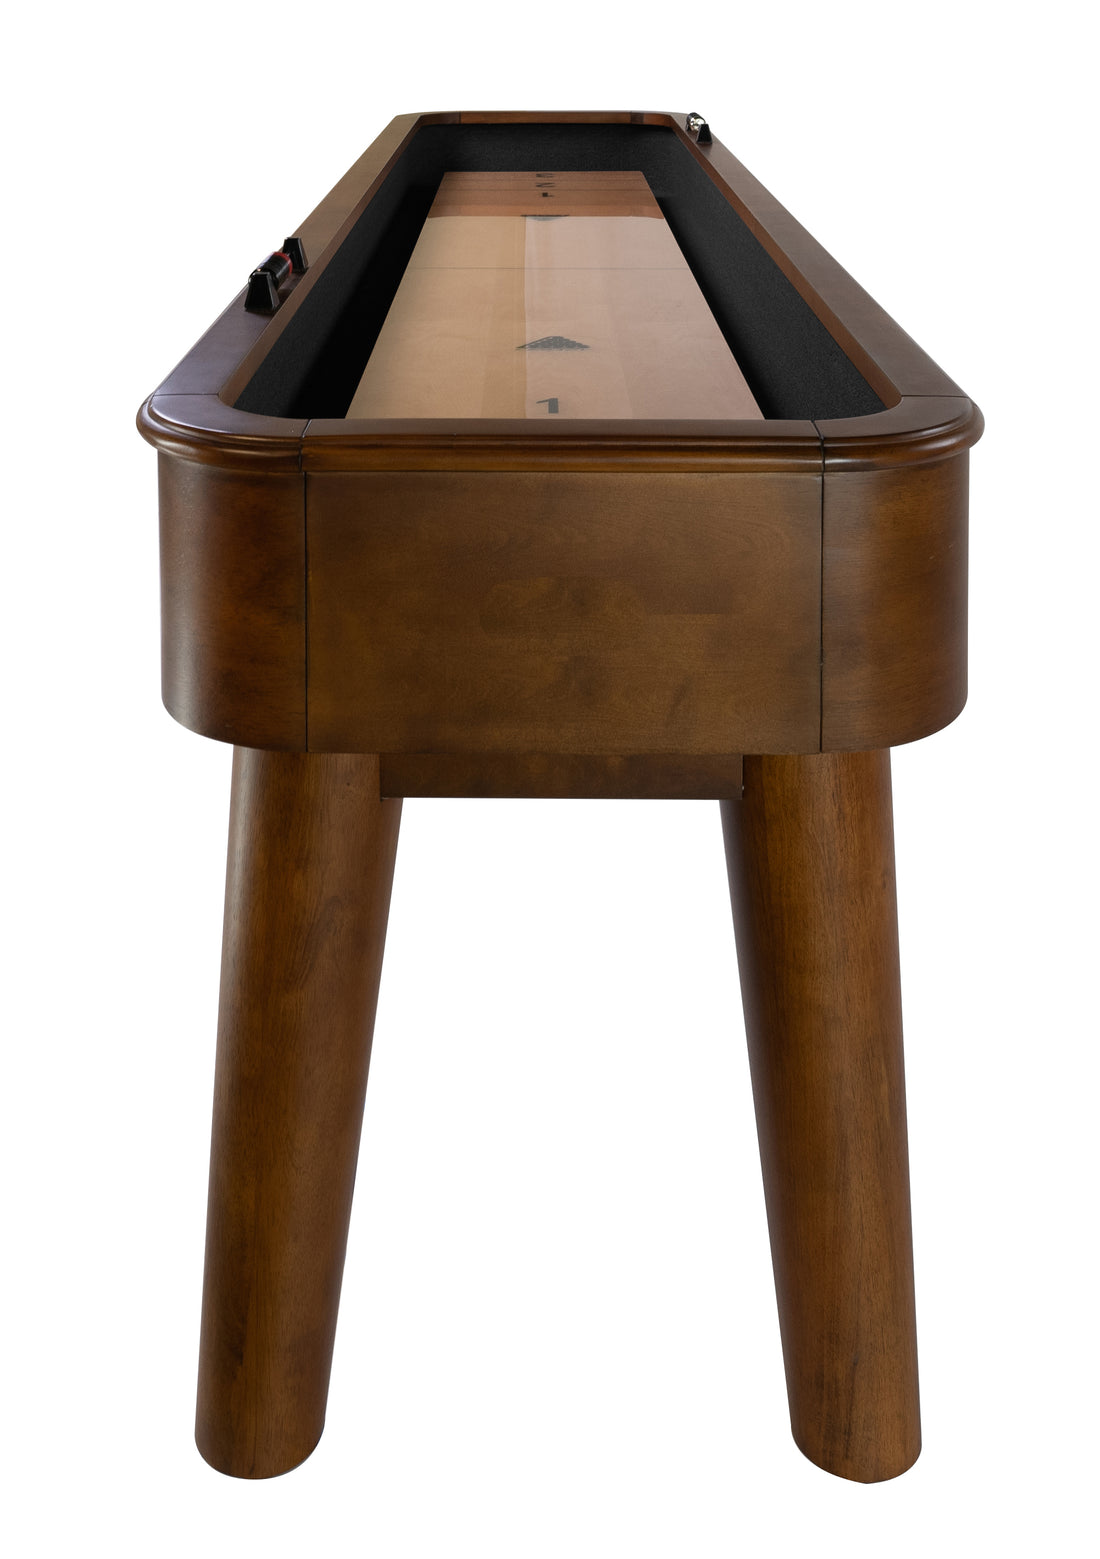 Legacy Billiards Collins 12 Ft Shuffleboard in Nutmeg Finish End View